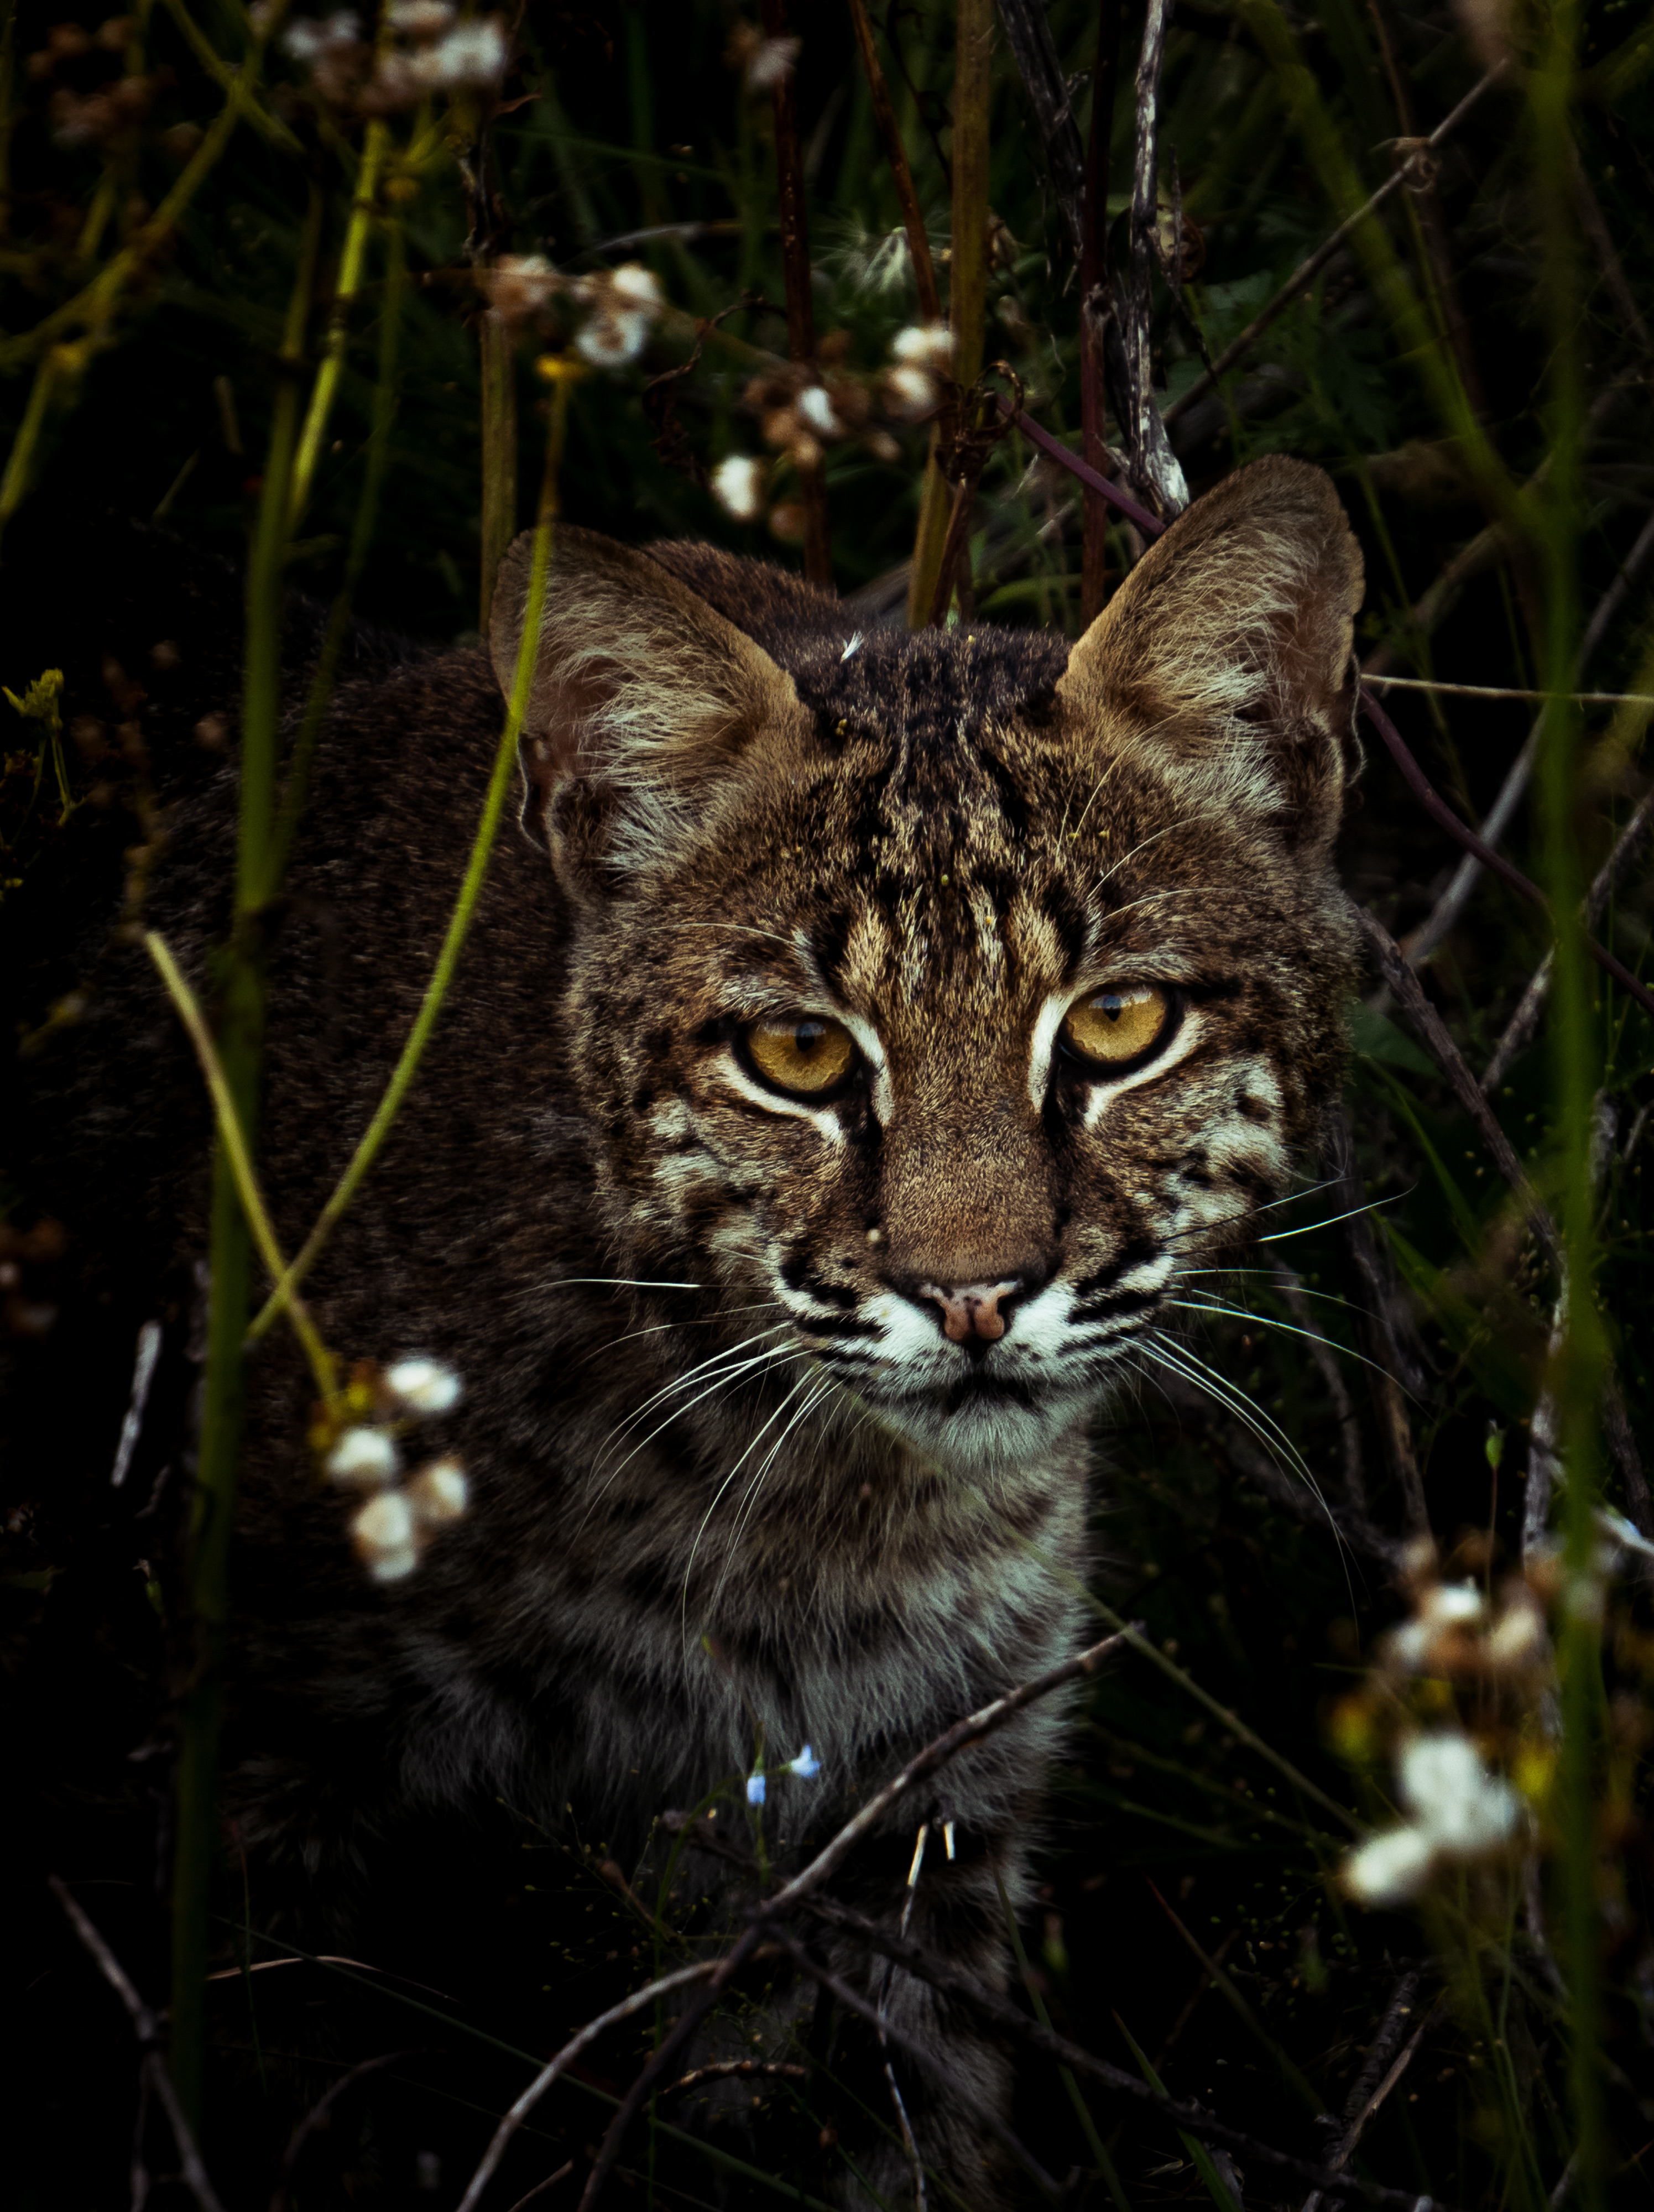 Elijah Lamb took first place in the Wildlife Category of the 2022 Outdoor Alabama Photo Contest with this image of a bobcat in the Tuskegee National Forest.